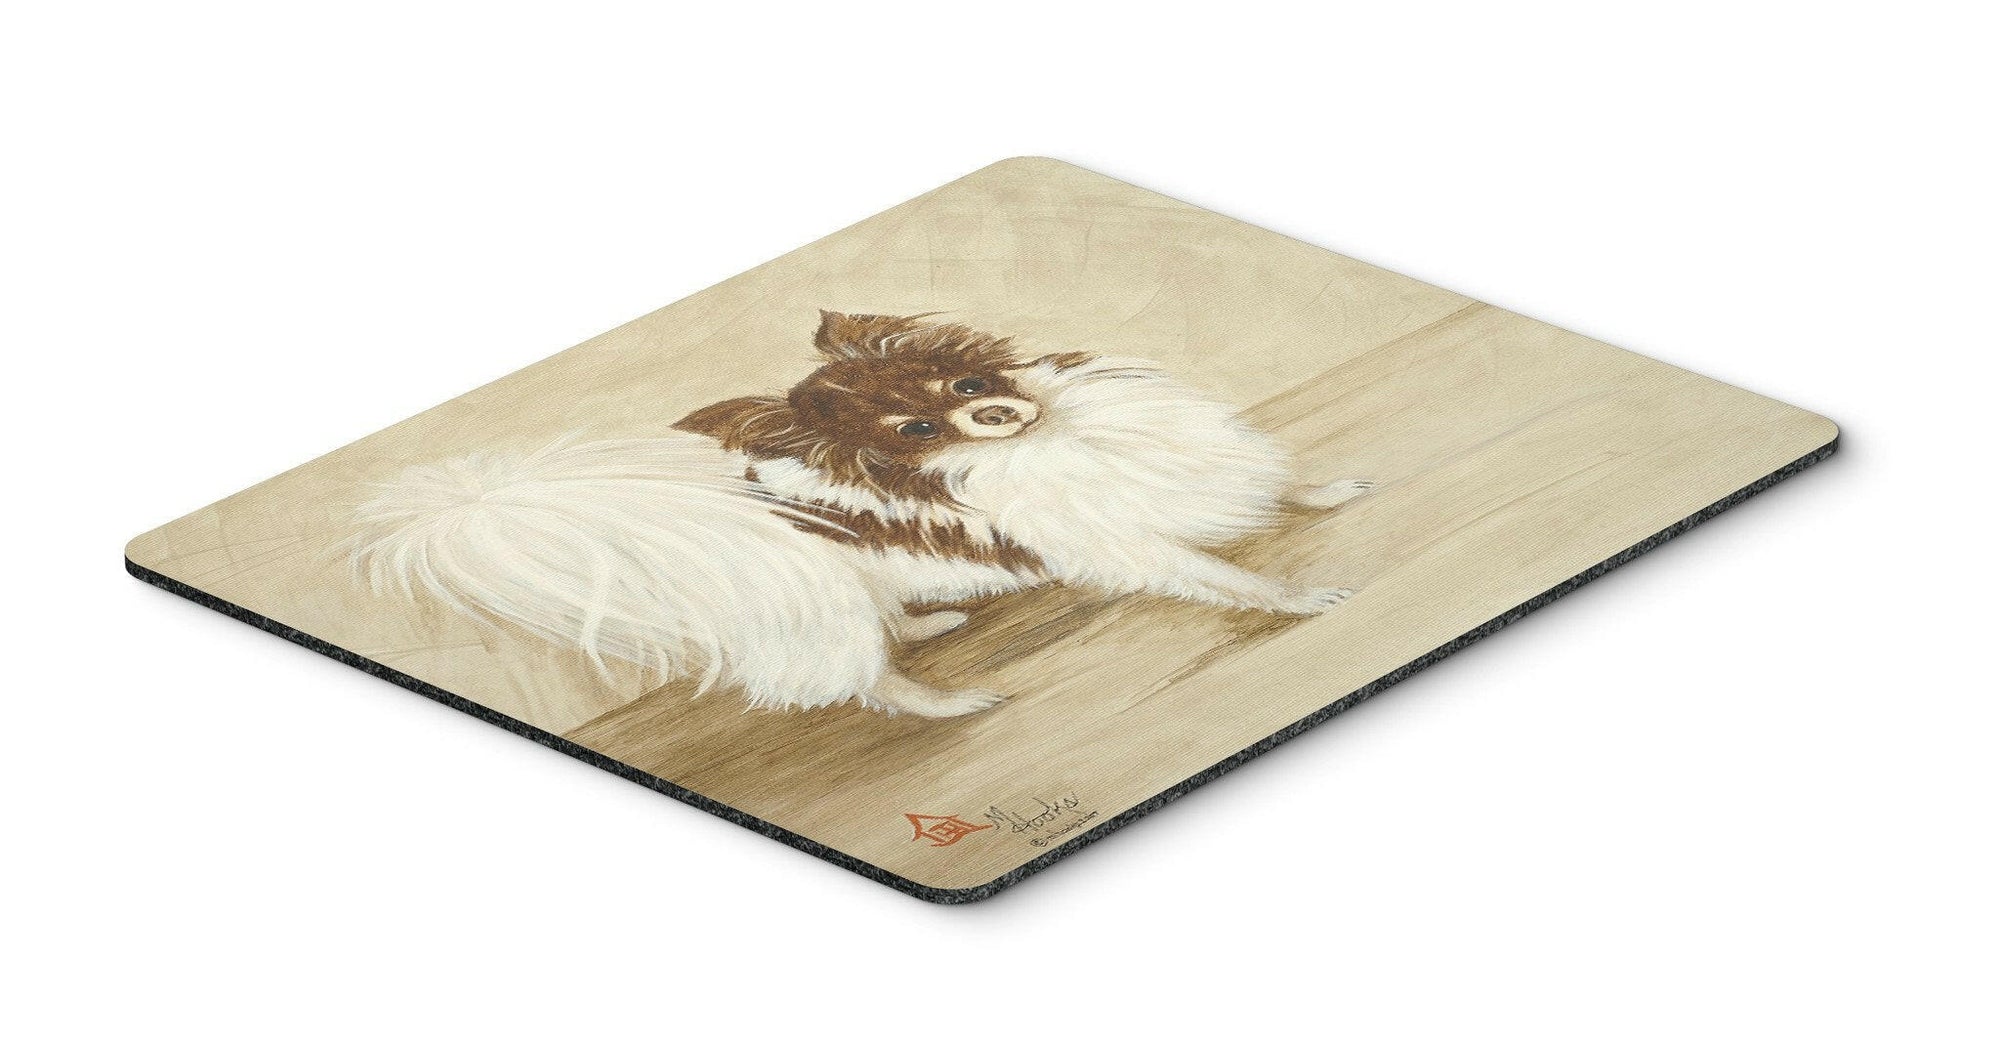 Chihuahua Favorite Flavors Mouse Pad, Hot Pad or Trivet MH1051MP by Caroline's Treasures